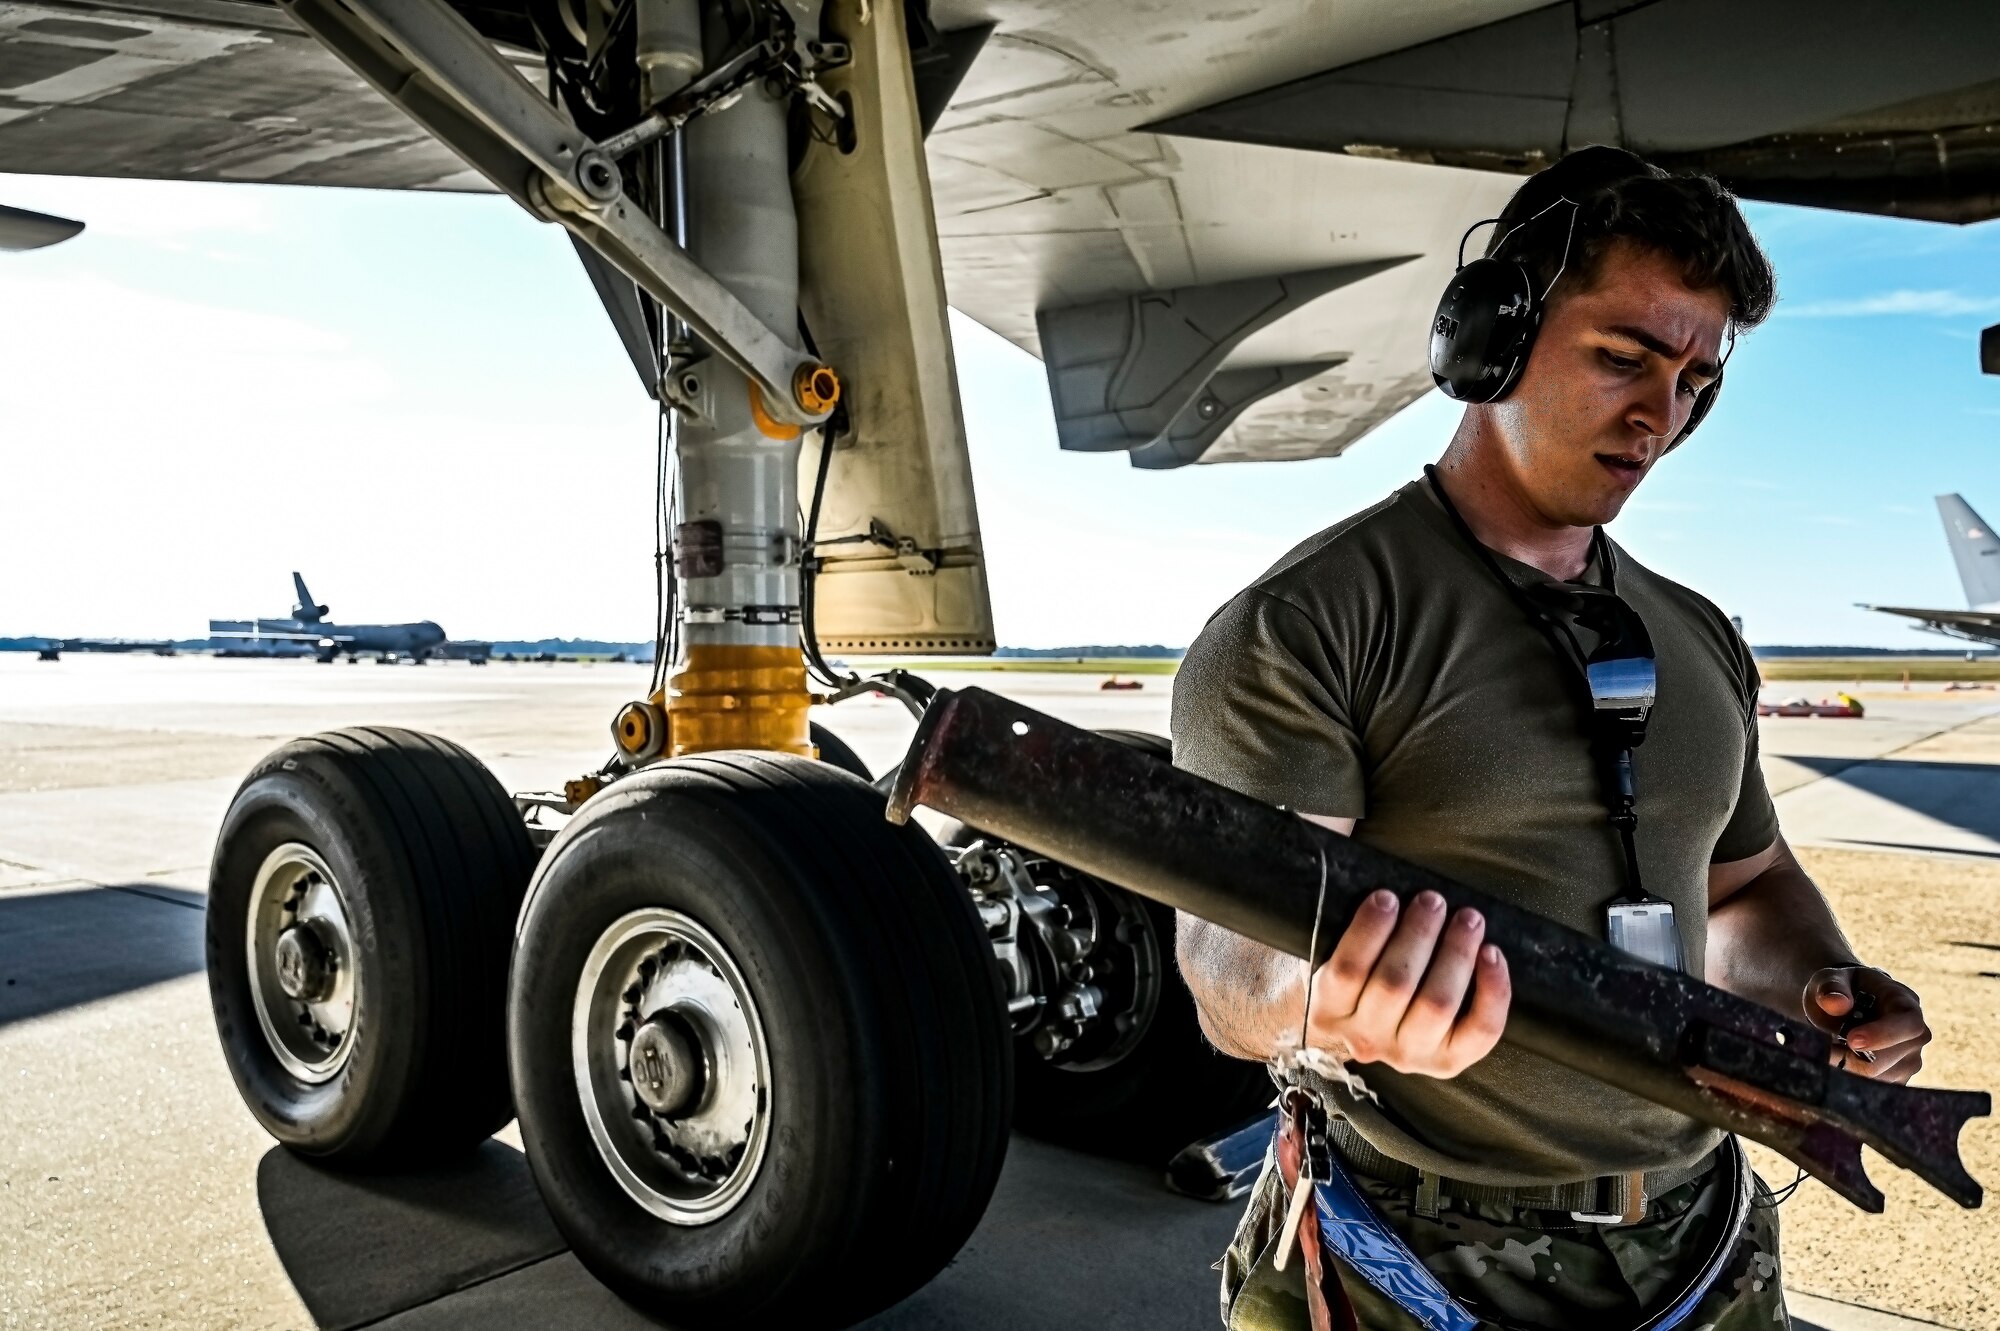 U.S. Air Force Senior Airman Austin Sondergard, 605th Aircraft Maintenance Squadron crew chief, performs pre-flight checks on a KC-10 extender at Joint Base McGuire-Dix-Lakehurst, N.J. on Oct. 10, 2022. Sondergard received brain surgery to remove an arteriovenous malformation, and later suffered losses to both memory, speech, and motor skills due to a stroke. Recovered, Sondergard returned to his duties as a Crew Chief and hobby as an avid powerlifter.